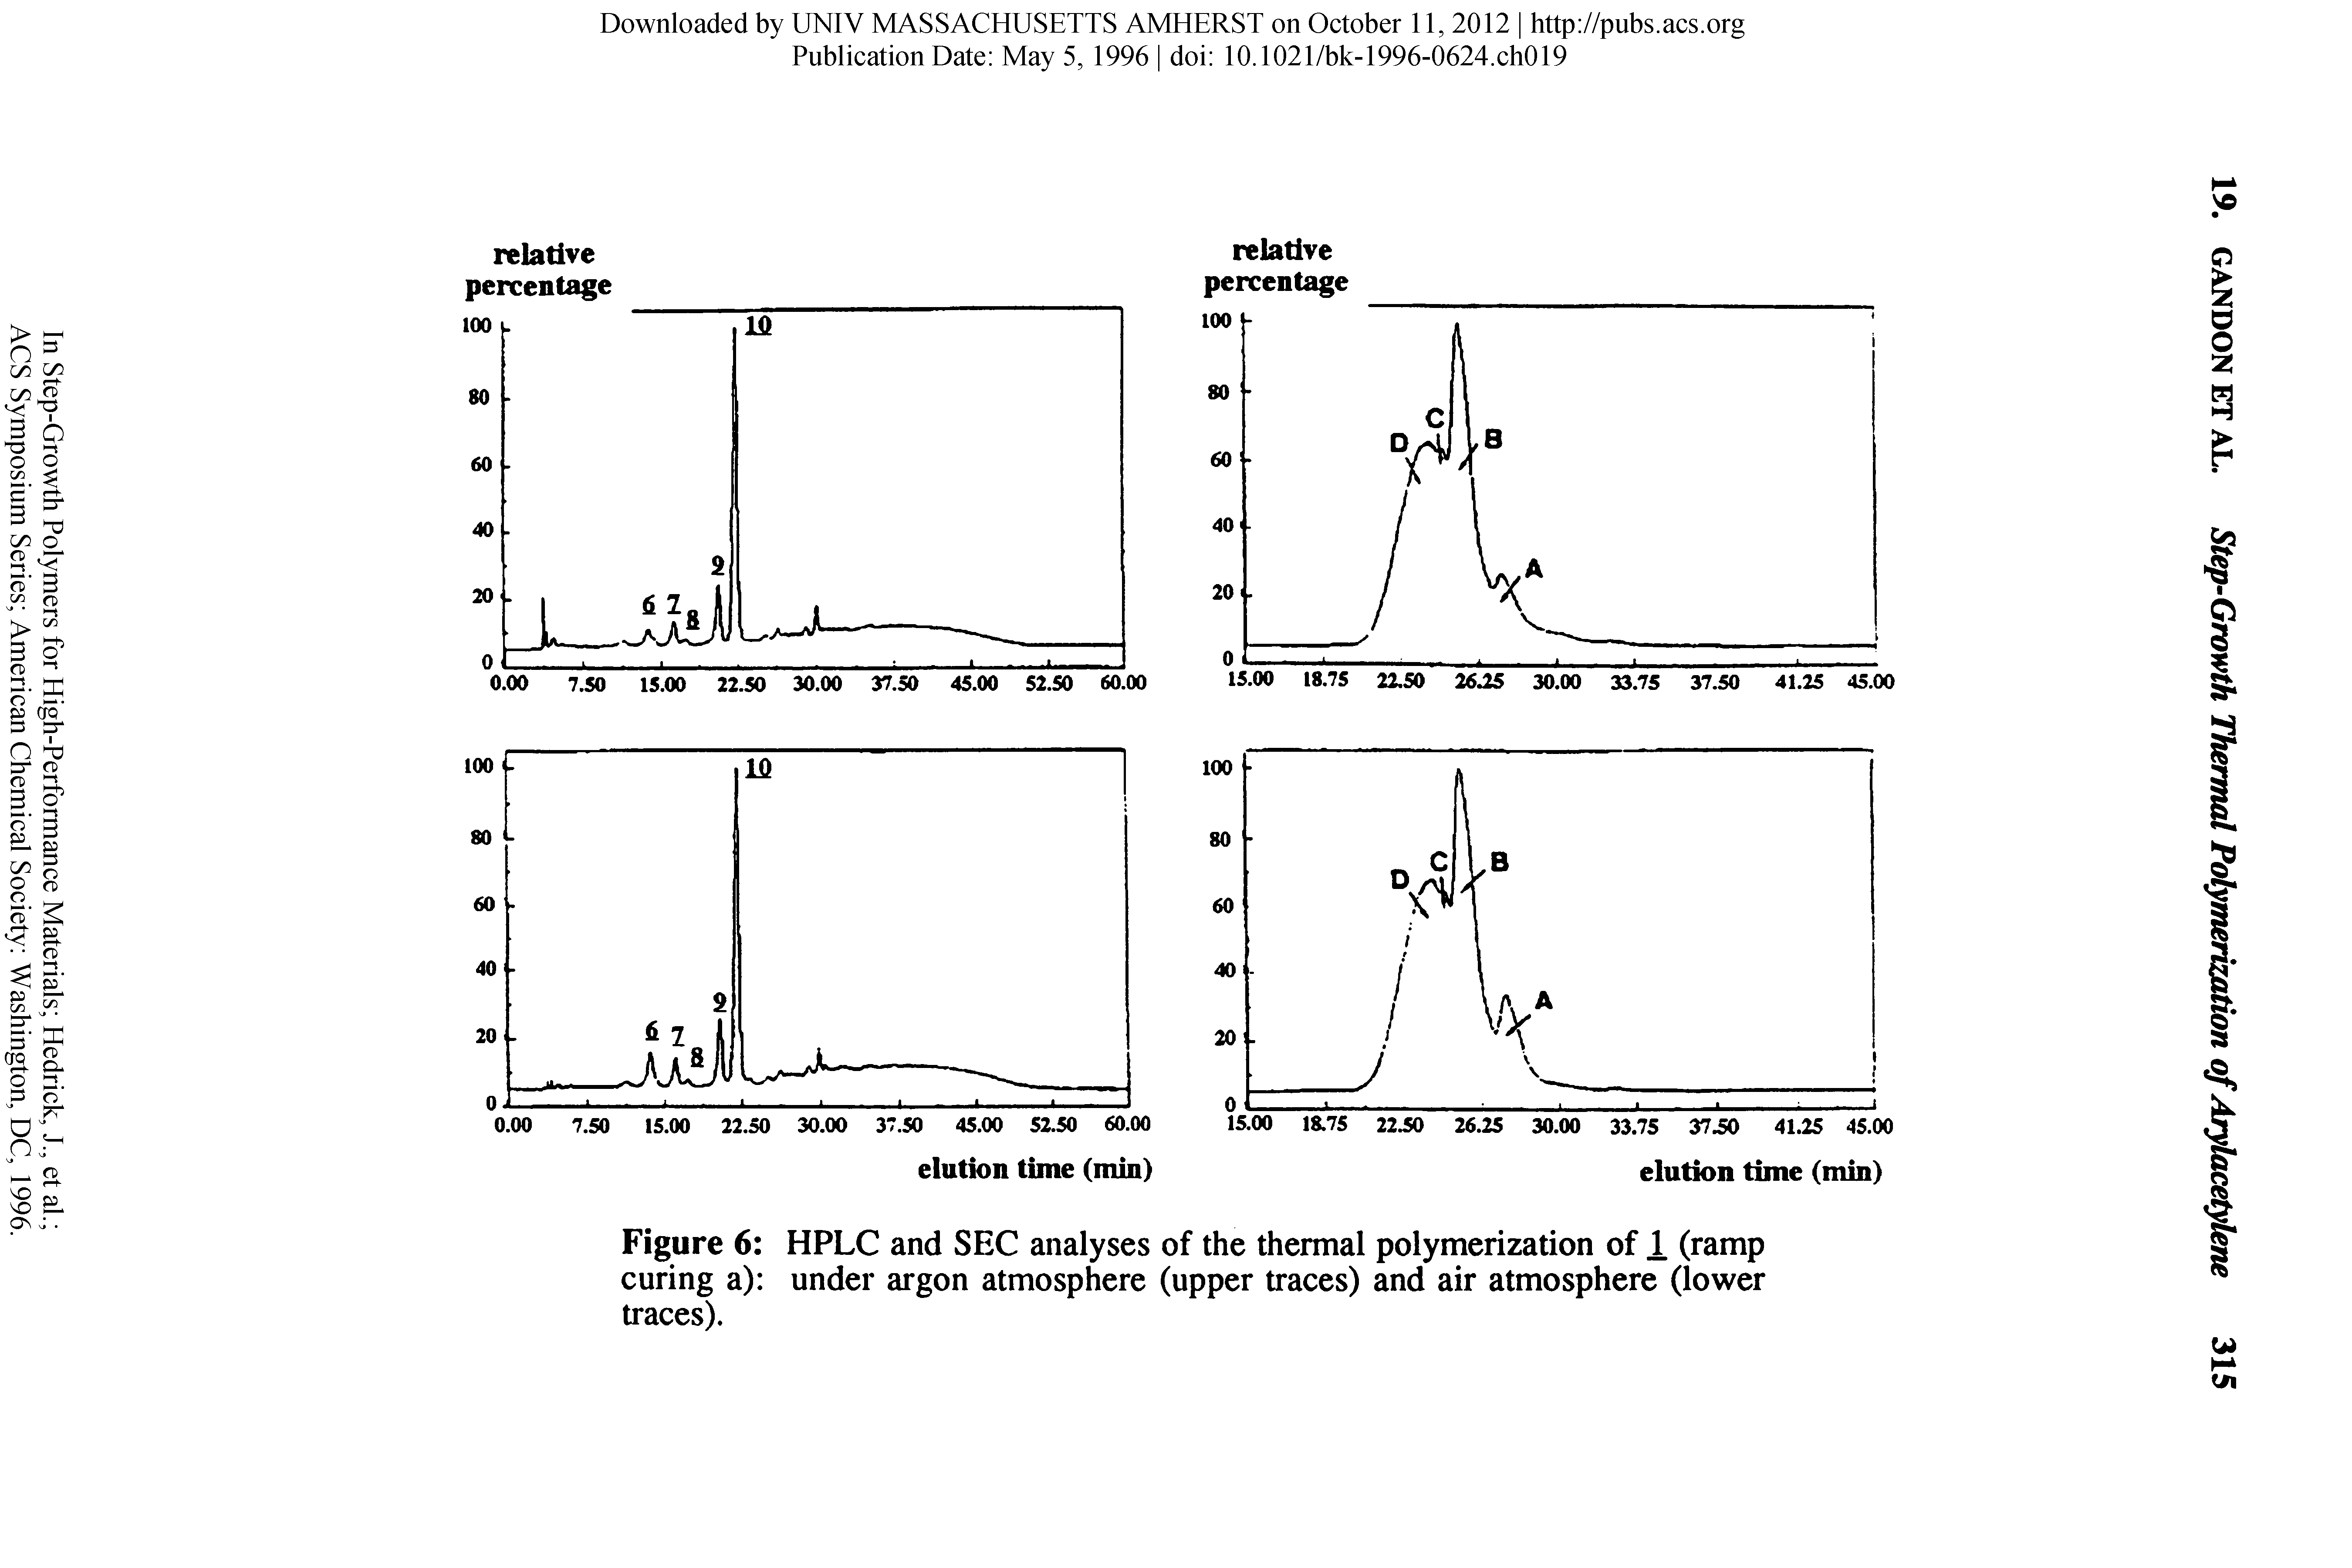 Figure 6 HPLC and SEC analyses of the thermal polymerization of 1 (ramp curing a) under argon atmosphere (upper traces) and air atmosphere (lower traces).